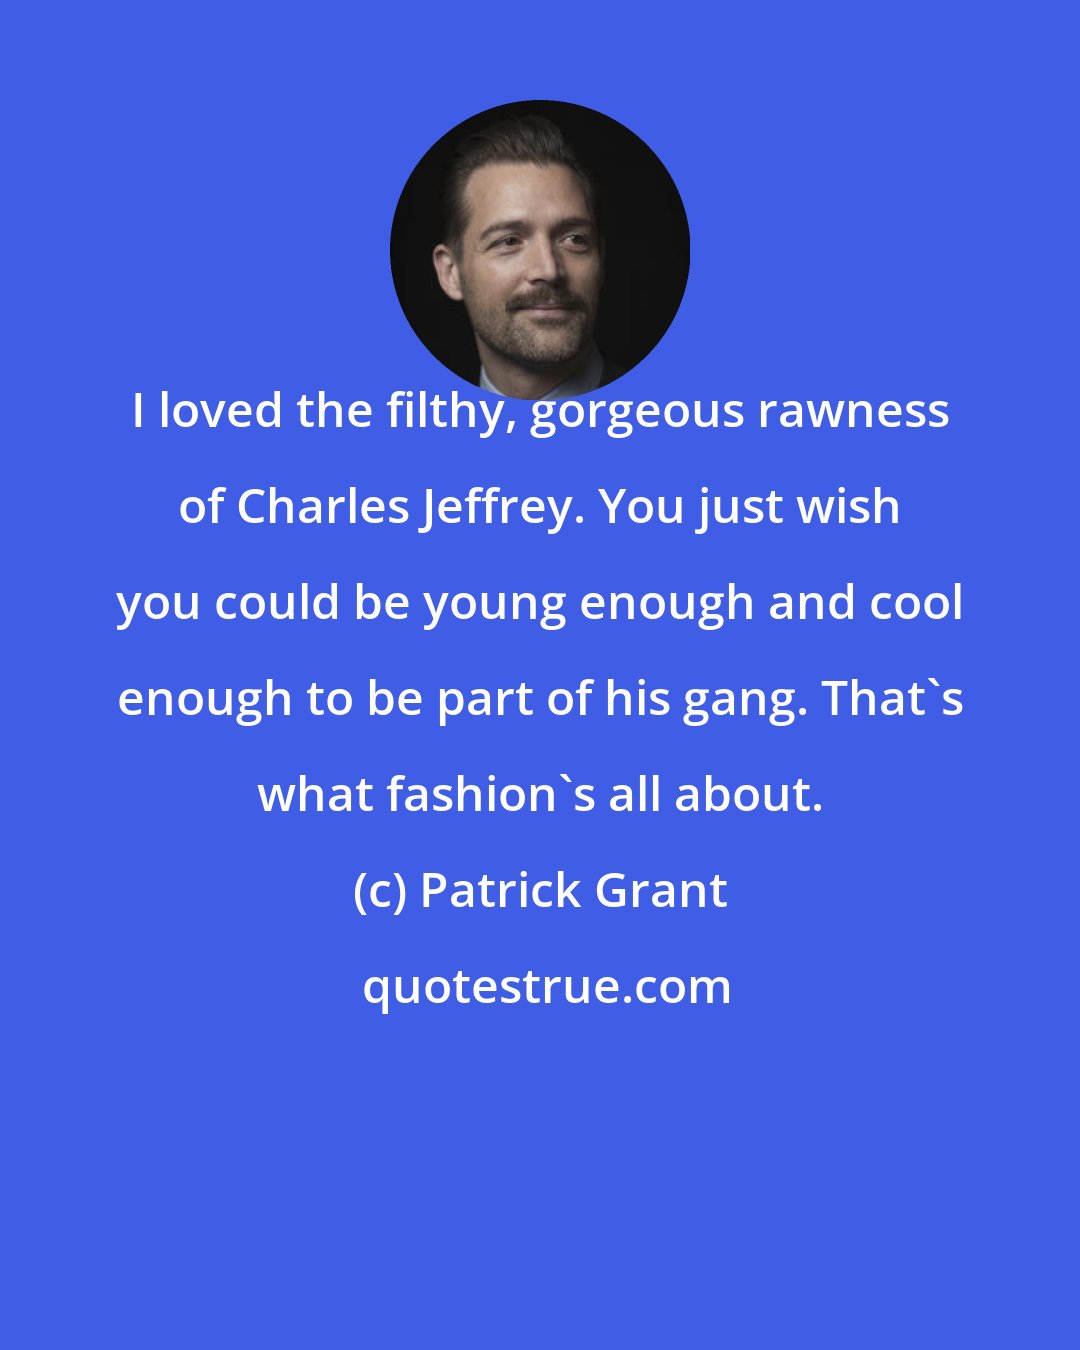 Patrick Grant: I loved the filthy, gorgeous rawness of Charles Jeffrey. You just wish you could be young enough and cool enough to be part of his gang. That's what fashion's all about.